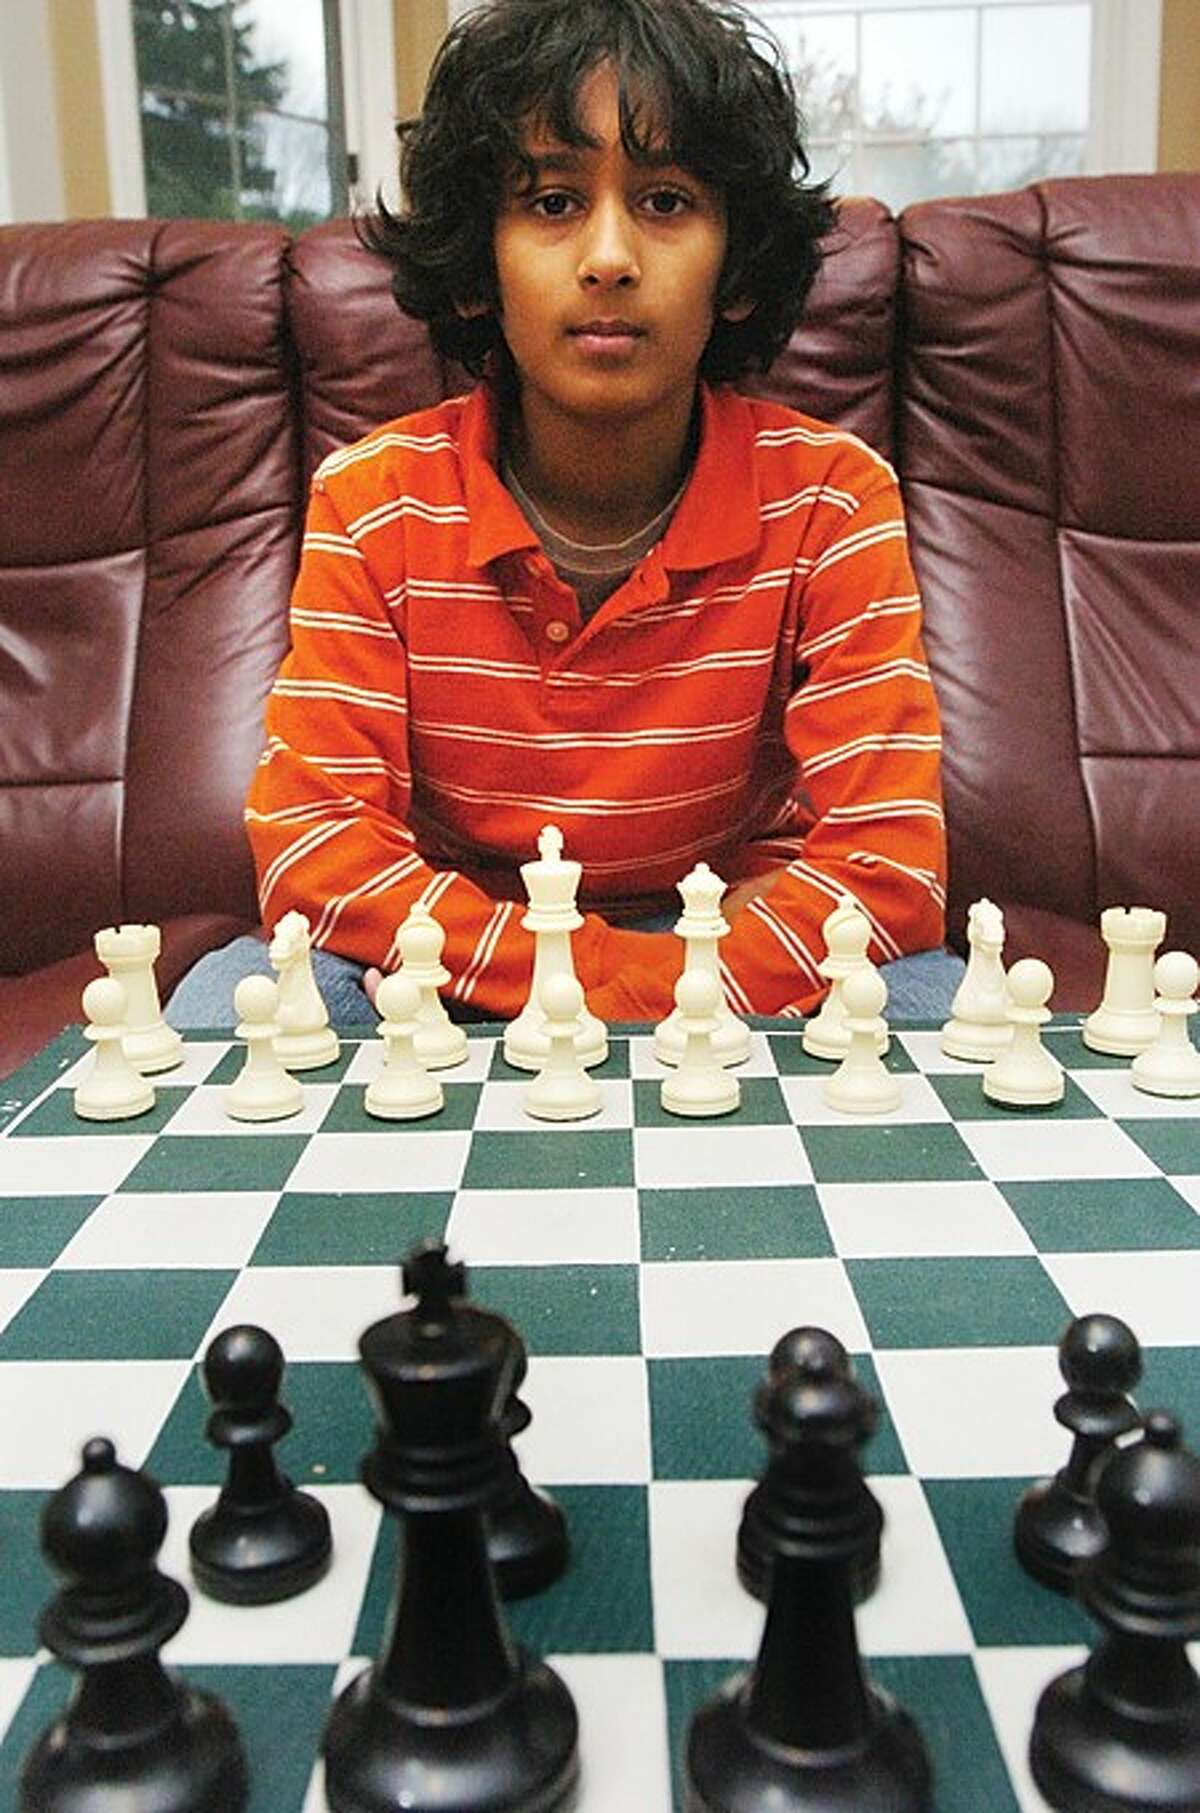 Wiltonian is state's highest rated chess player among peers